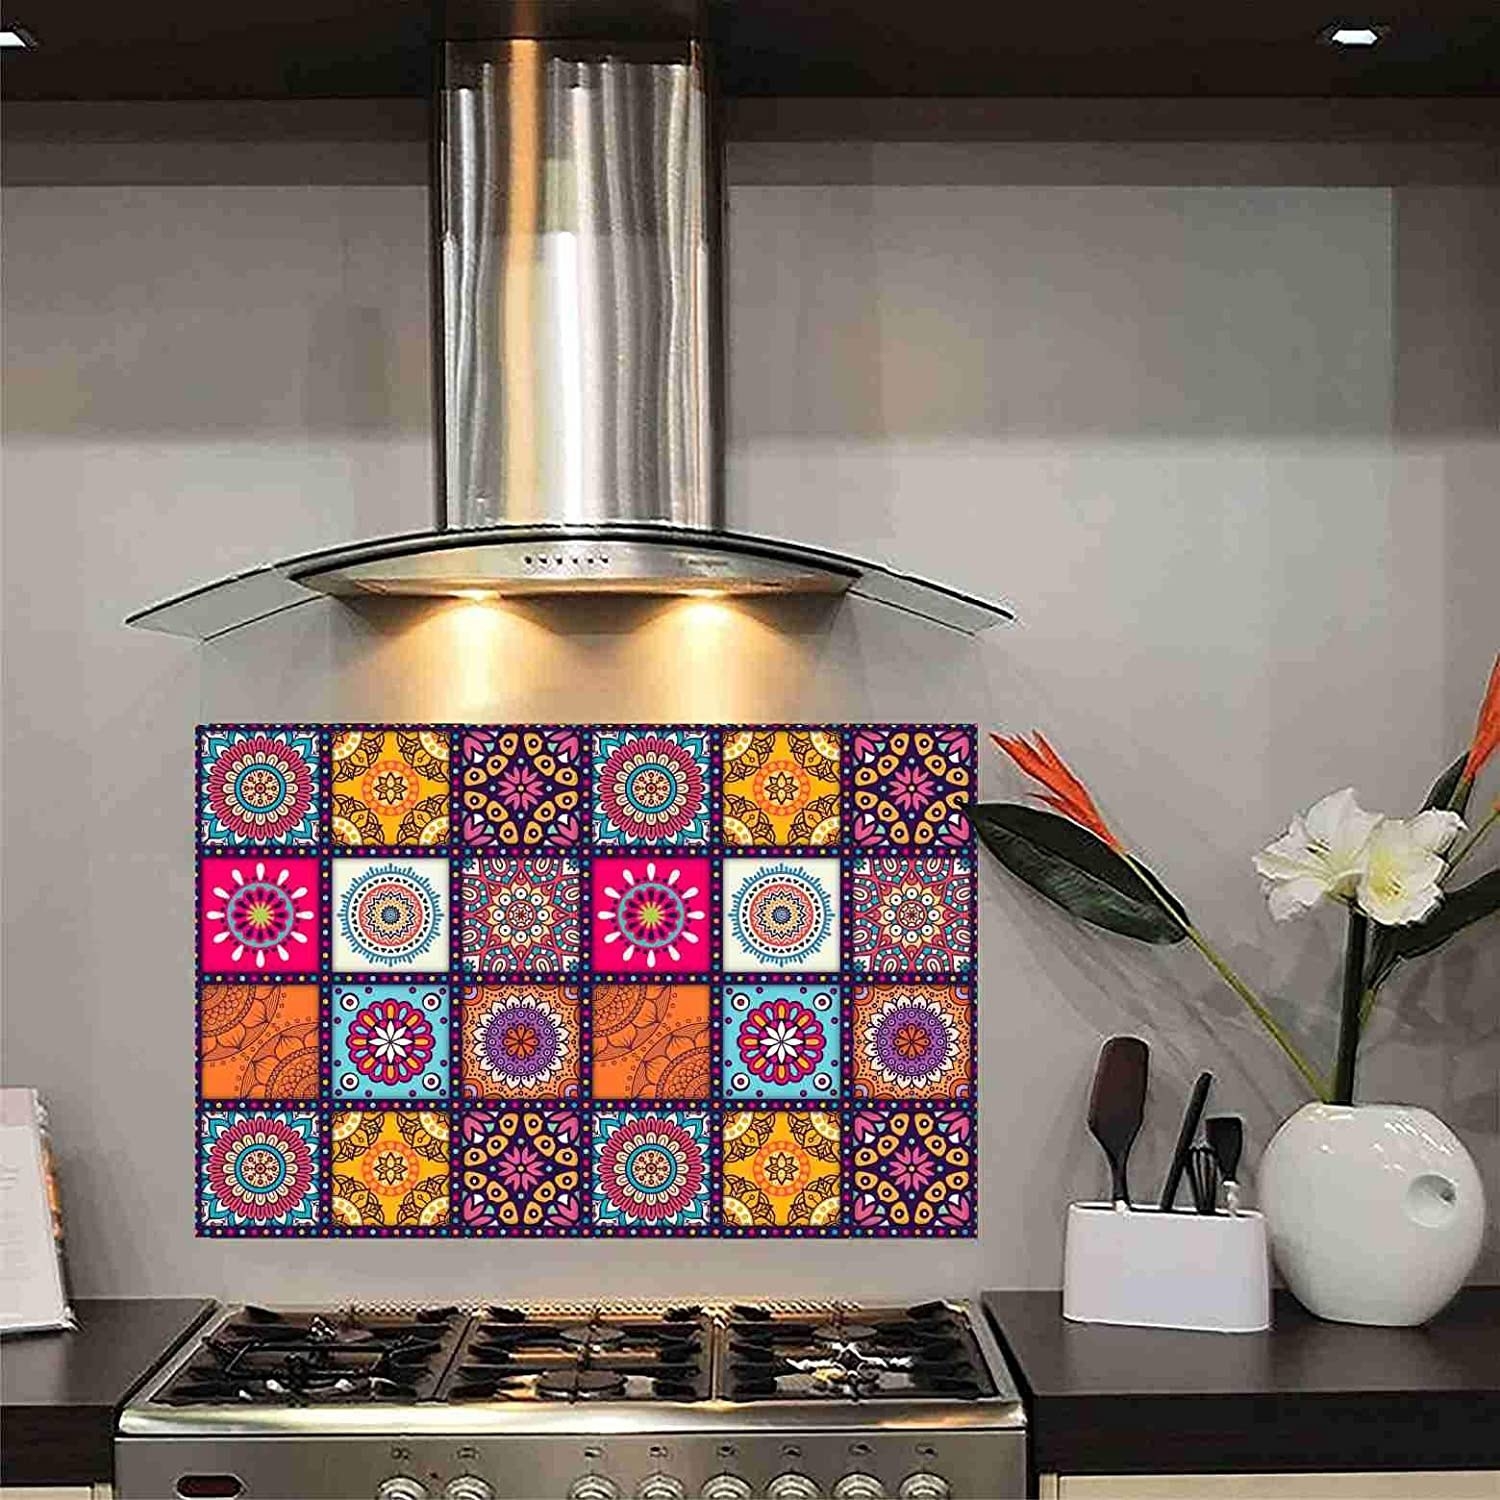 Colourful kitchen tiles on a wall on top of a stove 